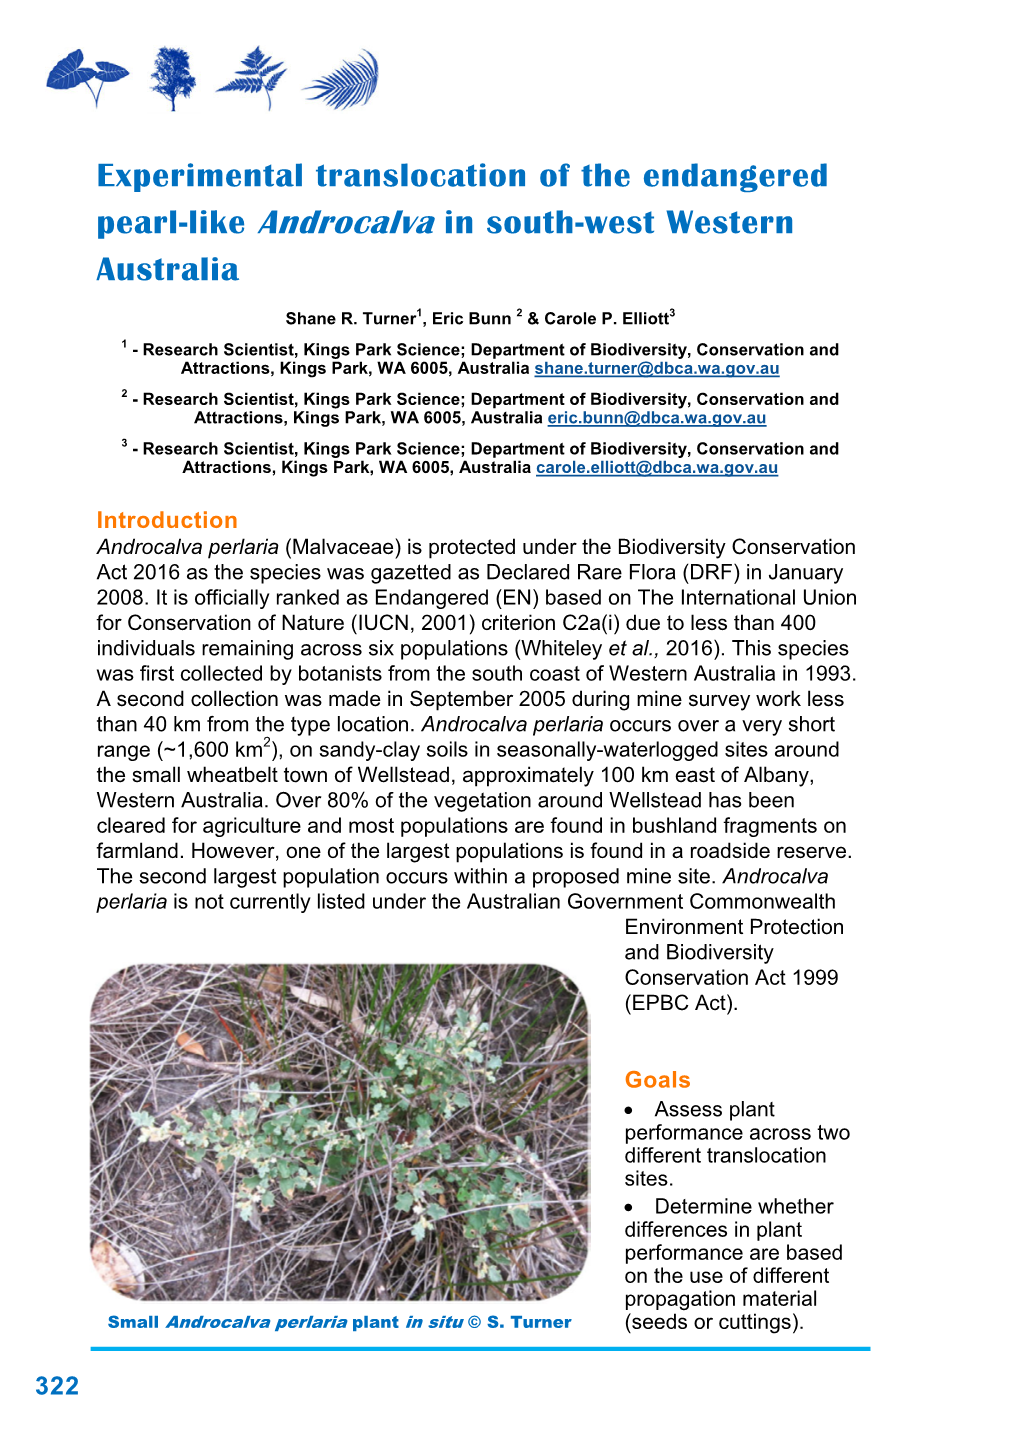 Experimental Translocation of the Endangered Pearl-Like Androcalva in South-West Western Australia